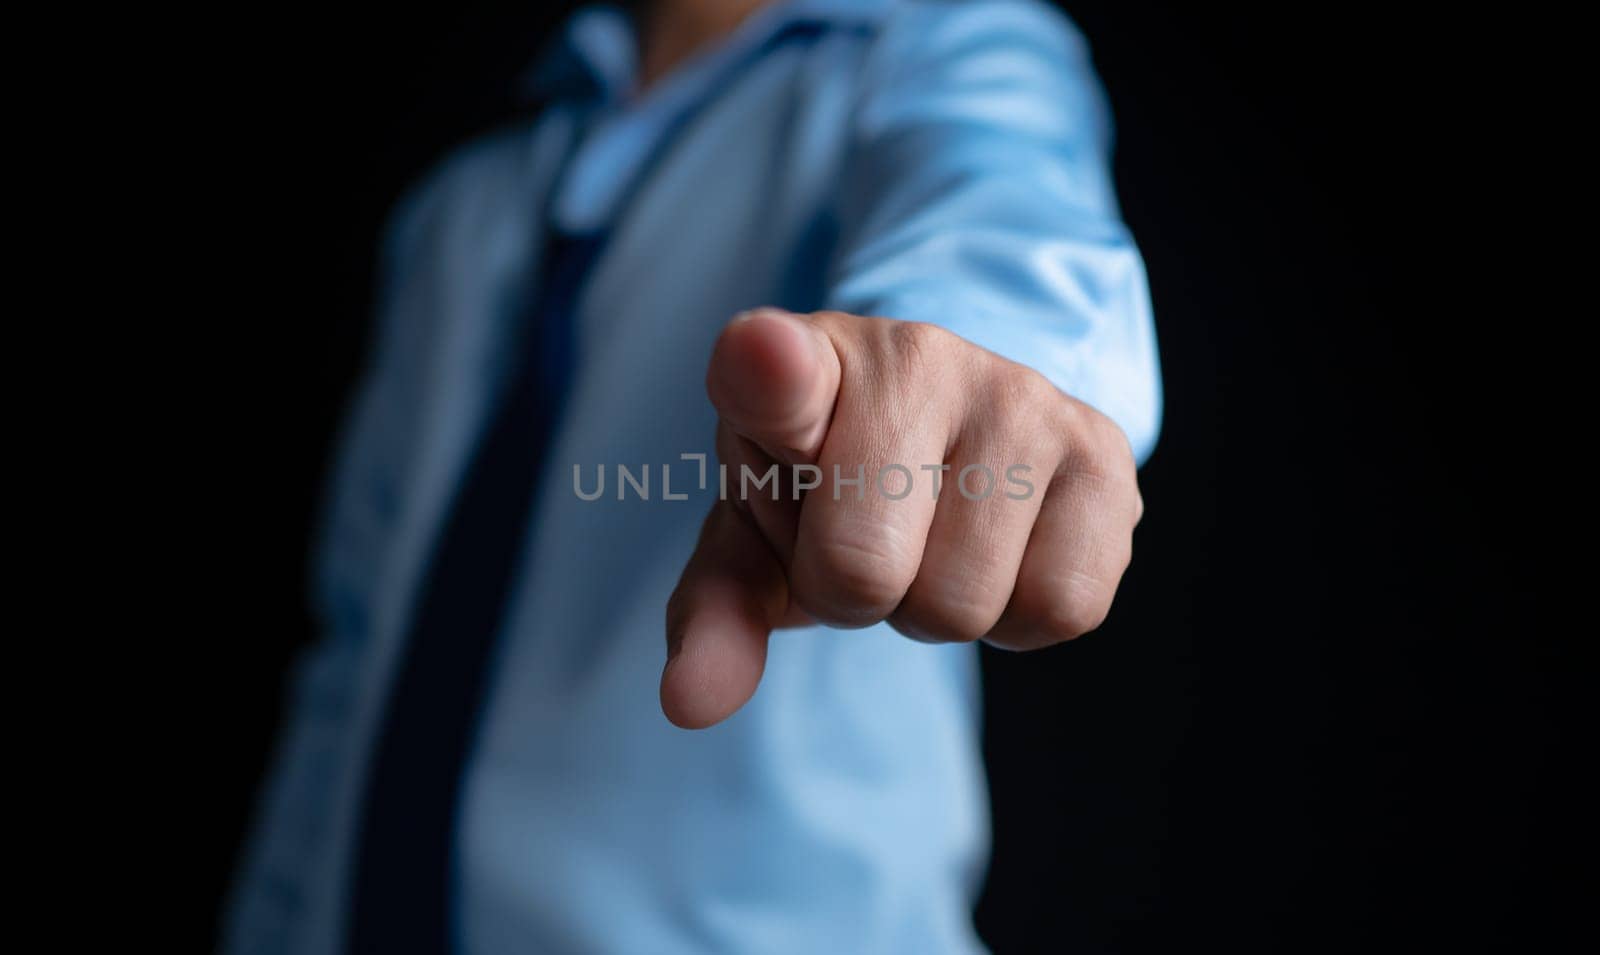 Employee makes a forward pointing gesture on a dark background. by Unimages2527